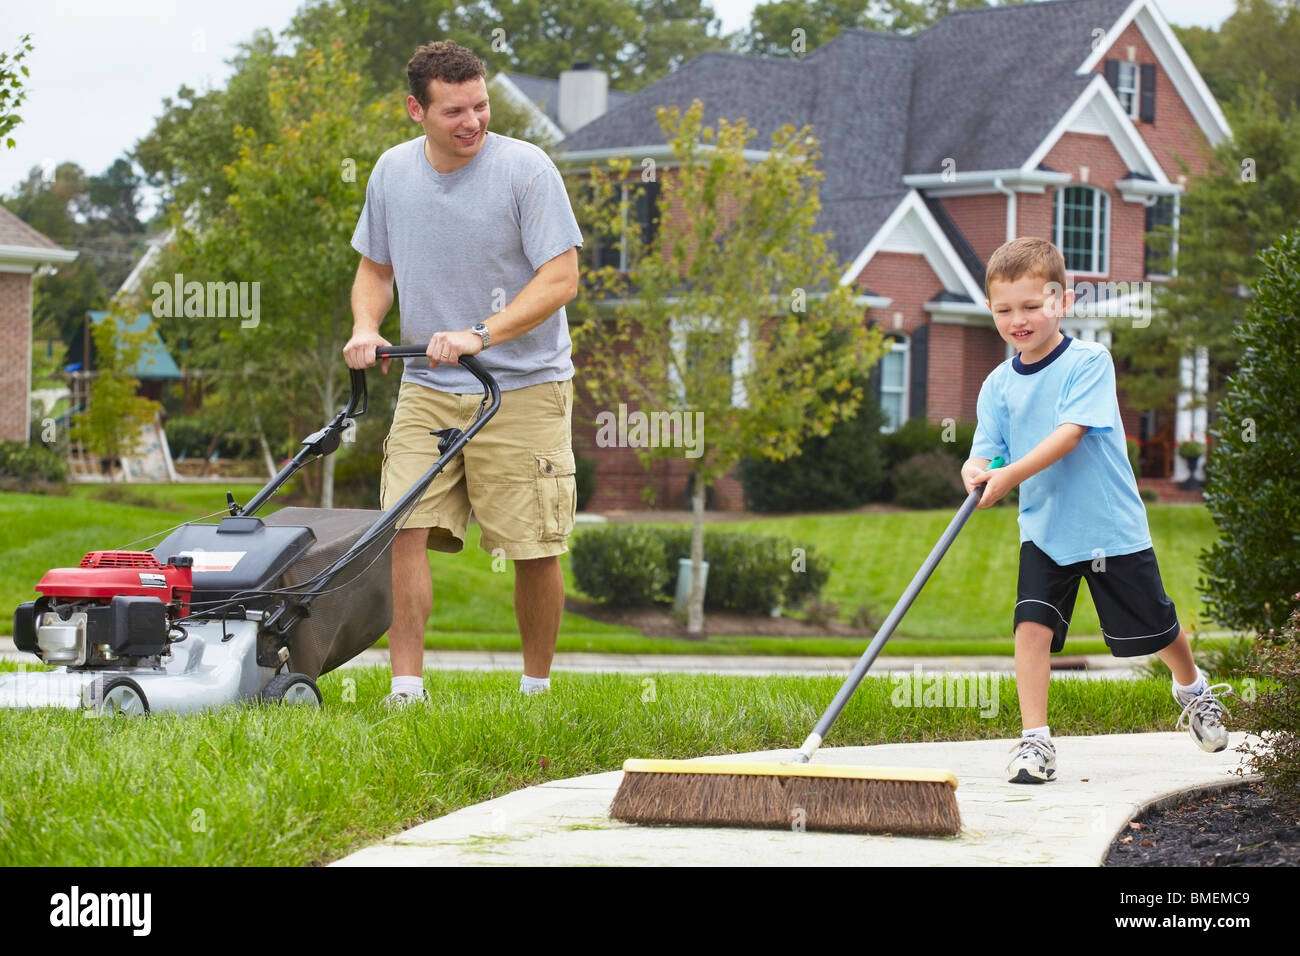 A Father And Son Working In The Yard Stock Photo